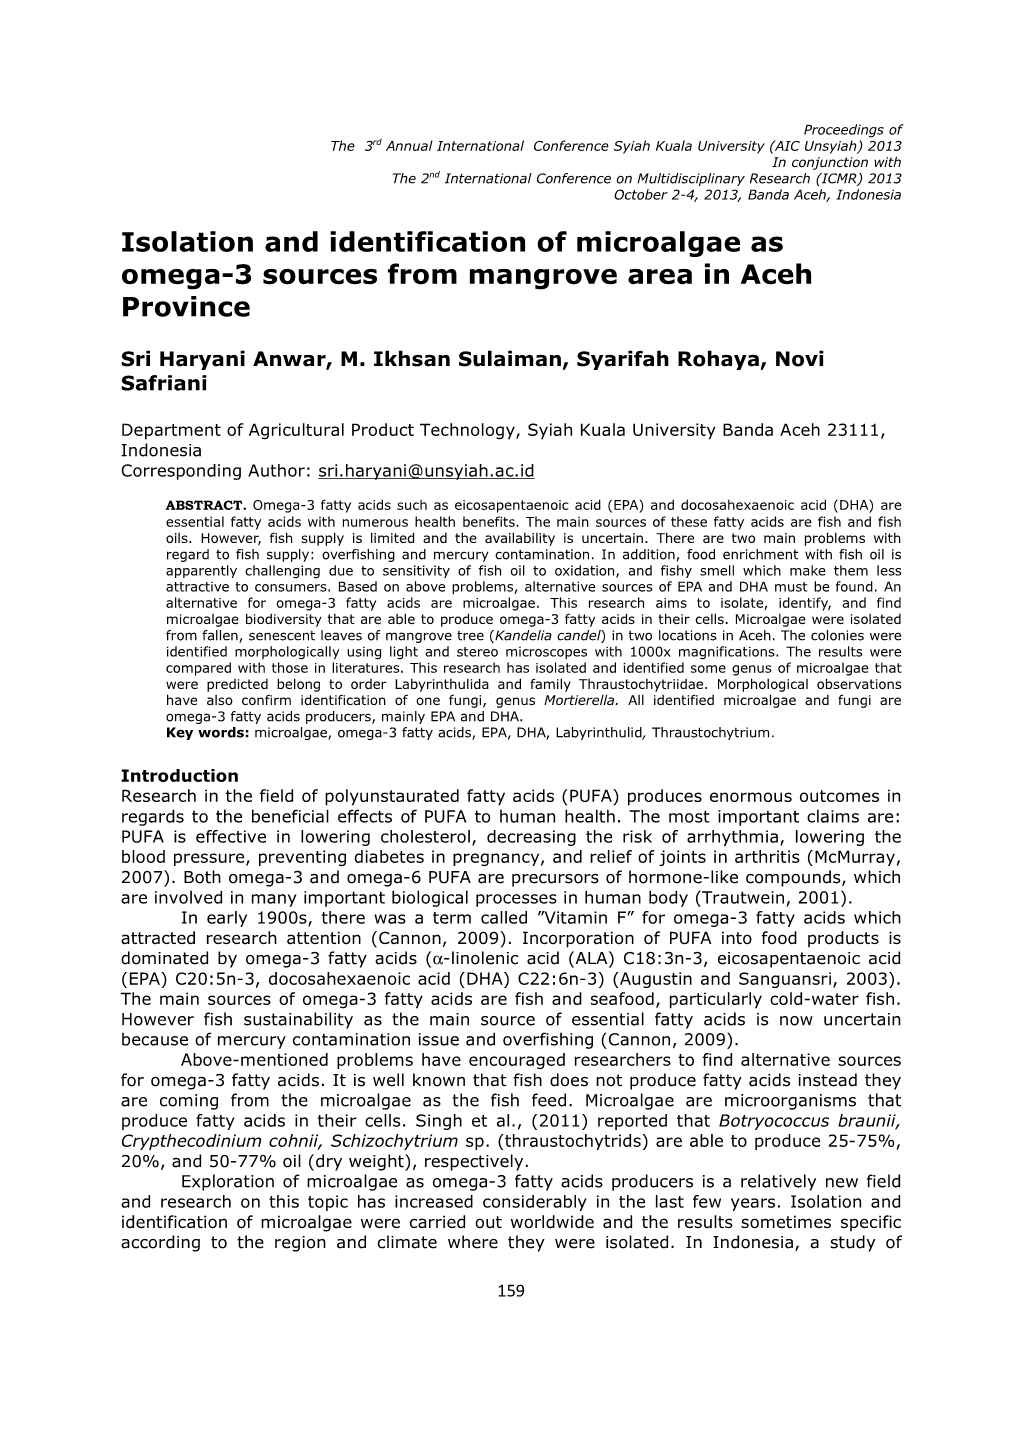 Isolation and Identification of Microalgae As Omega-3 Sources from Mangrove Area in Aceh Province